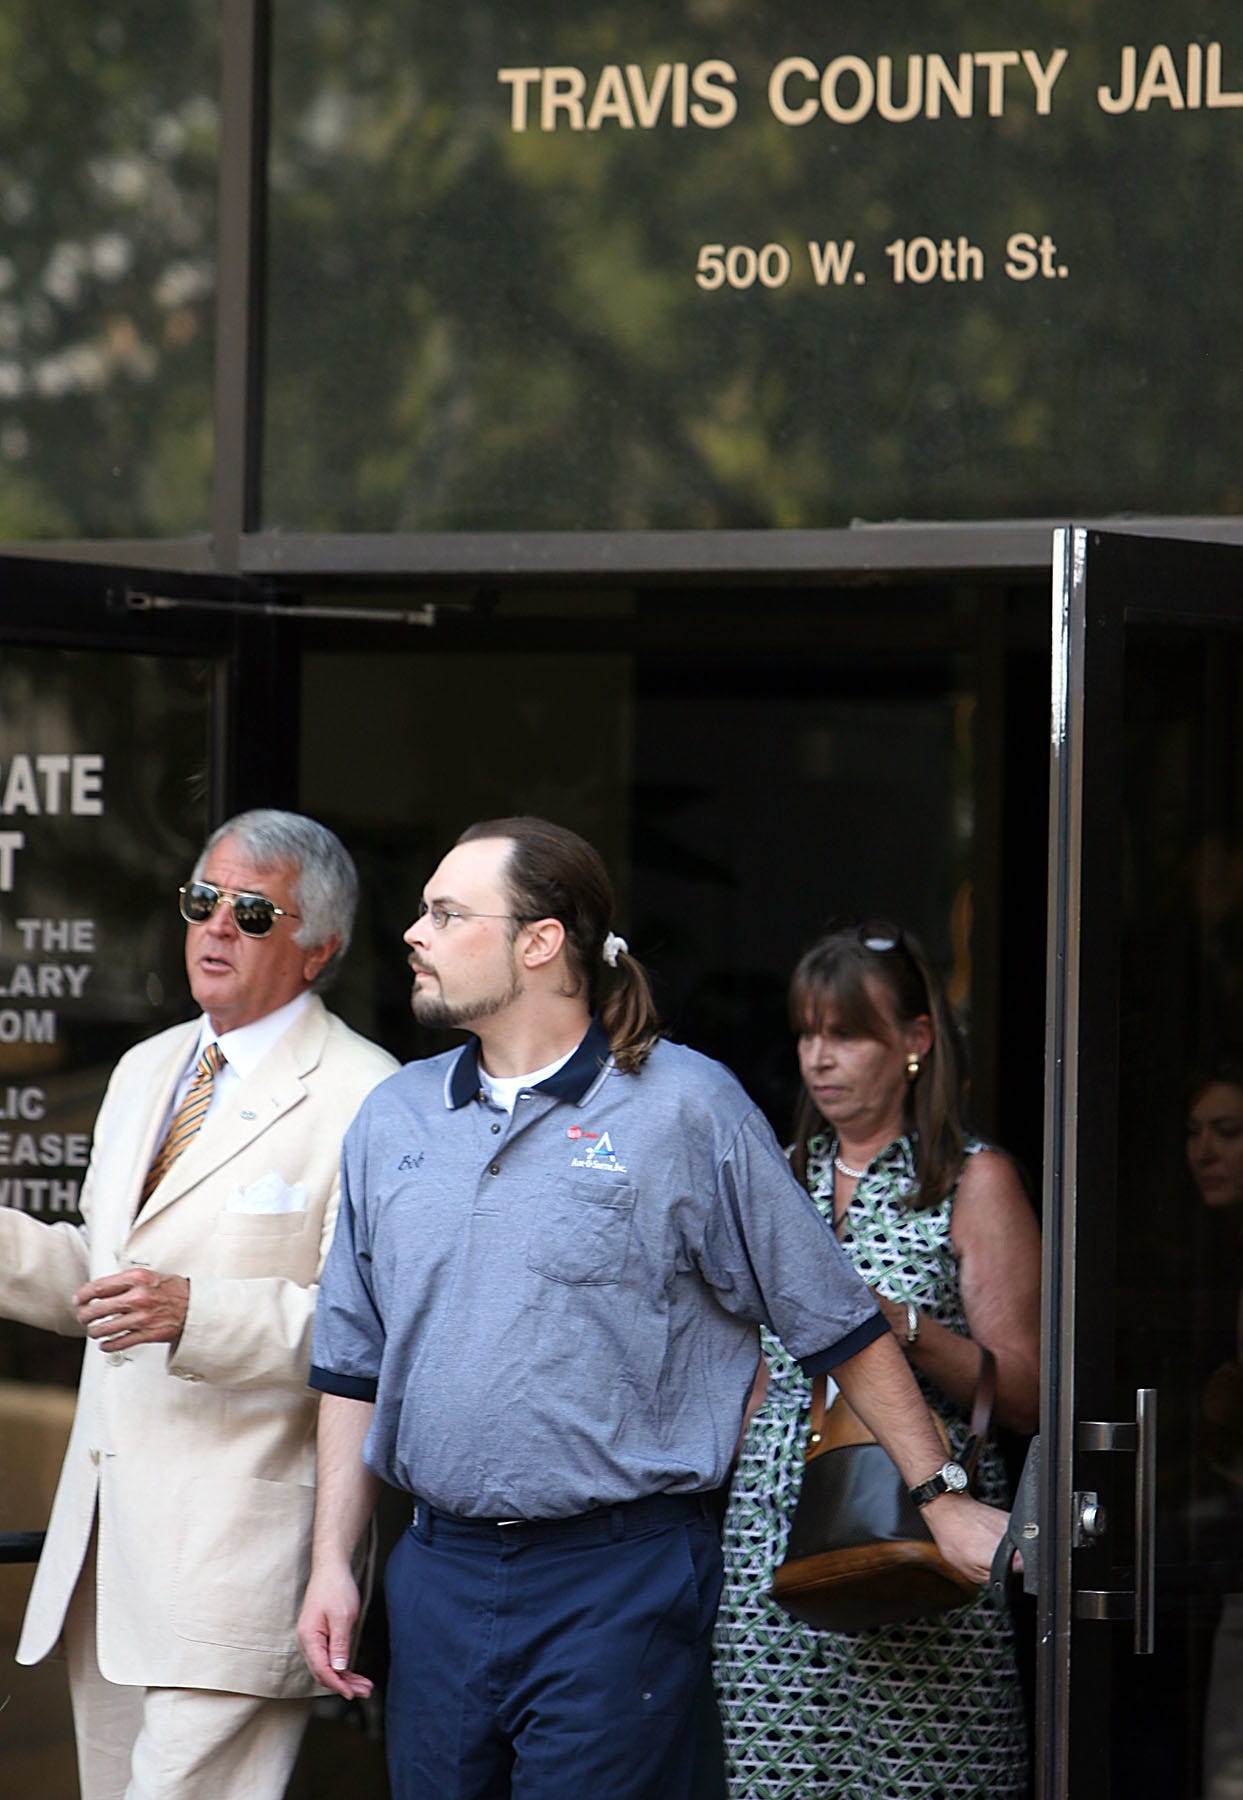 Robert Springsteen, right, walks out of the Travis County Jail with his attorney Joe James Sawyer after being released on personal bond June 24, 2009. Springsteen's conviction had been overturned three years earlier, and prosecutors struggled to rebuild the case against him.